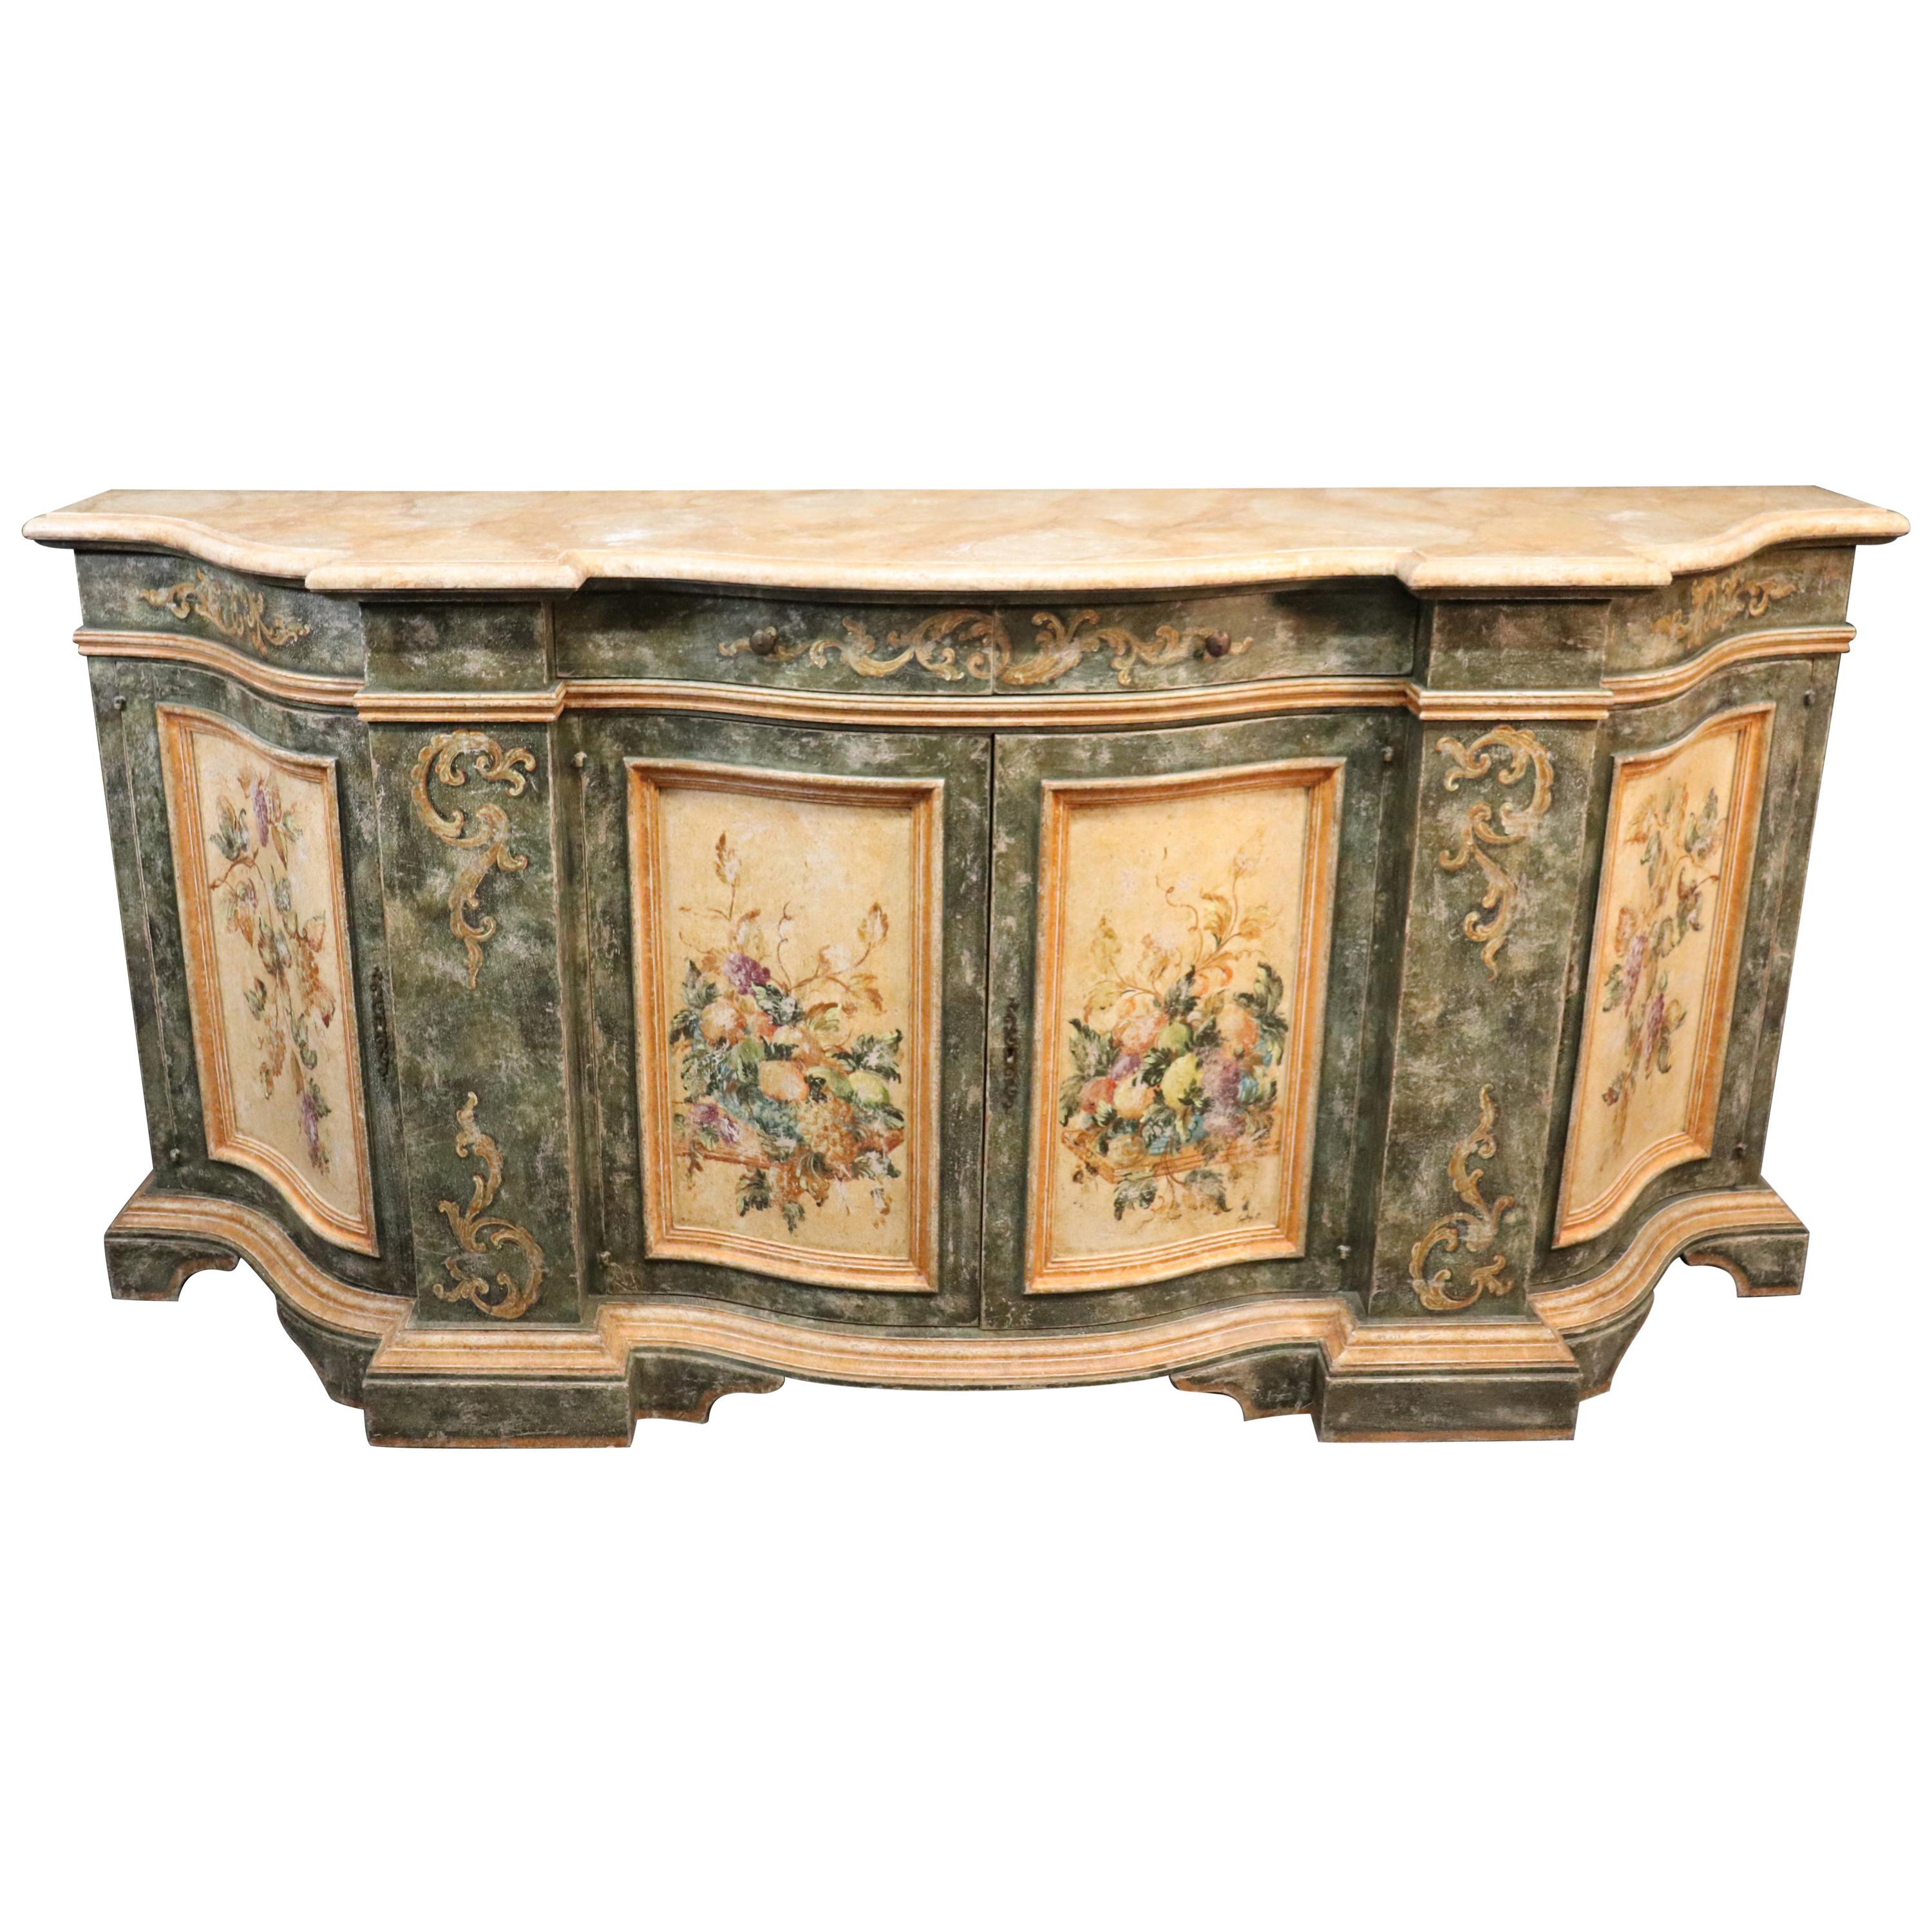 Large Venetian Faux Marble Paint Decorated Antique Distressed Sideboard Buffet